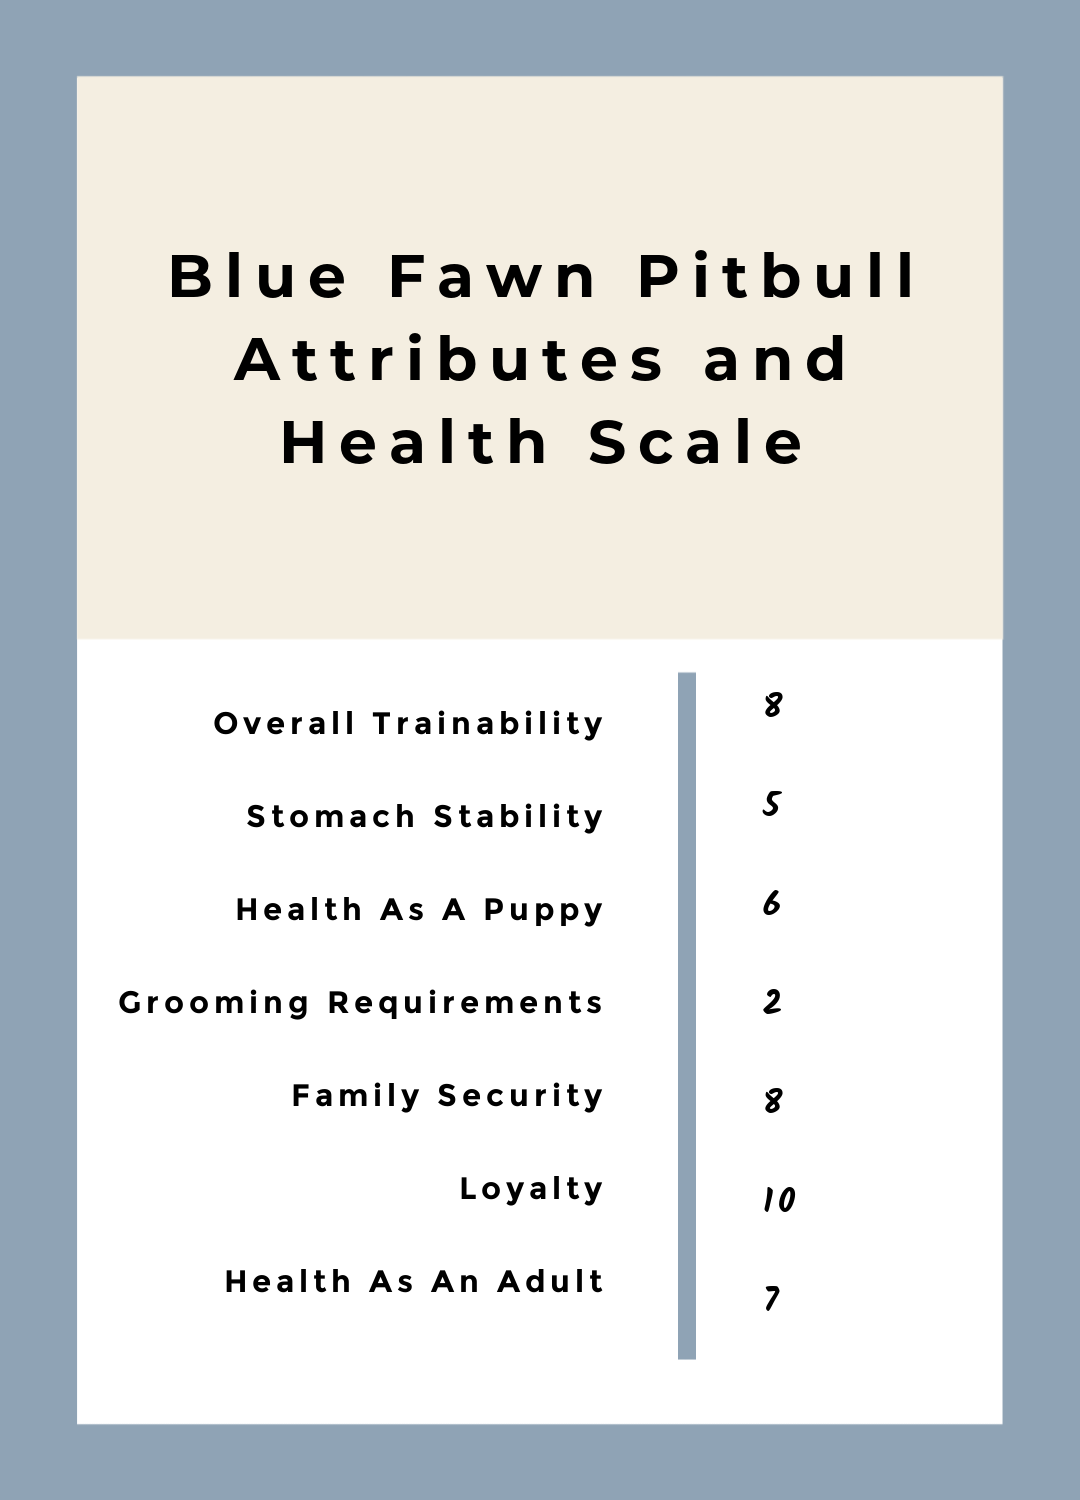 Blue Fawn Pitbull Attributes and Health Scale